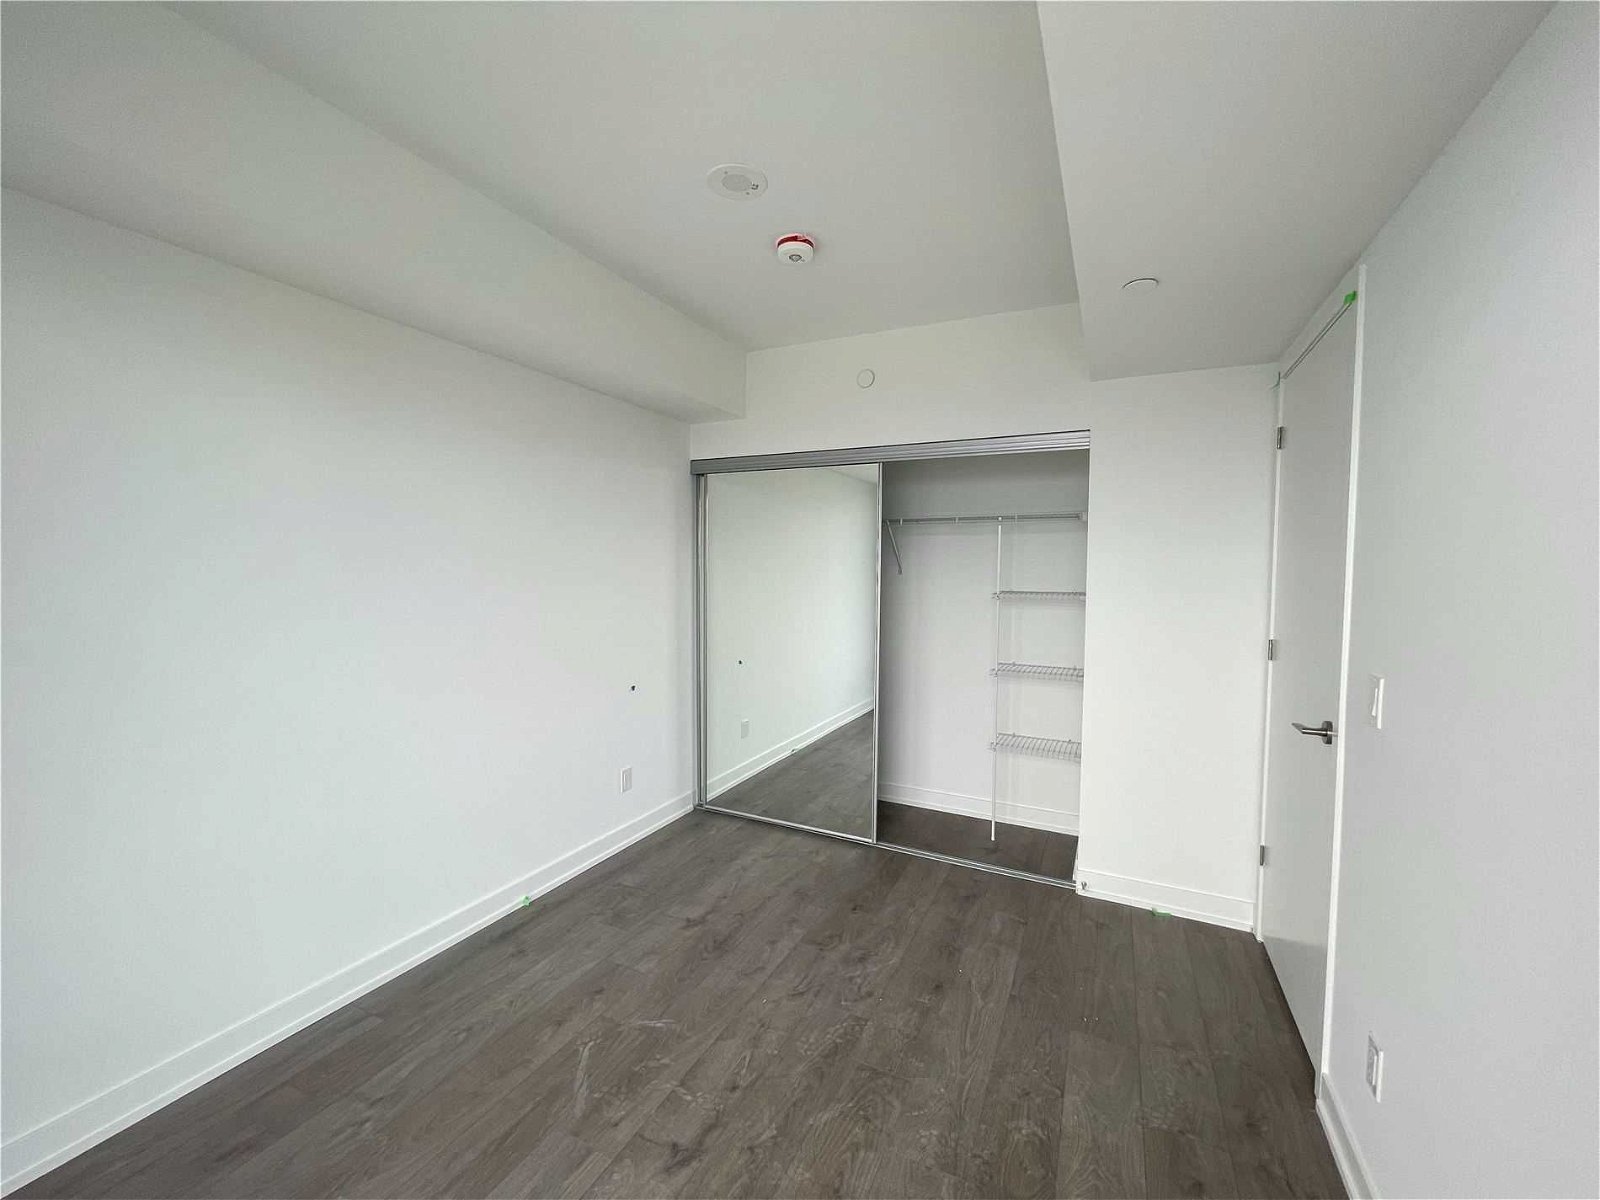 501 Yonge St, unit 4907 for rent in The Village - image #2